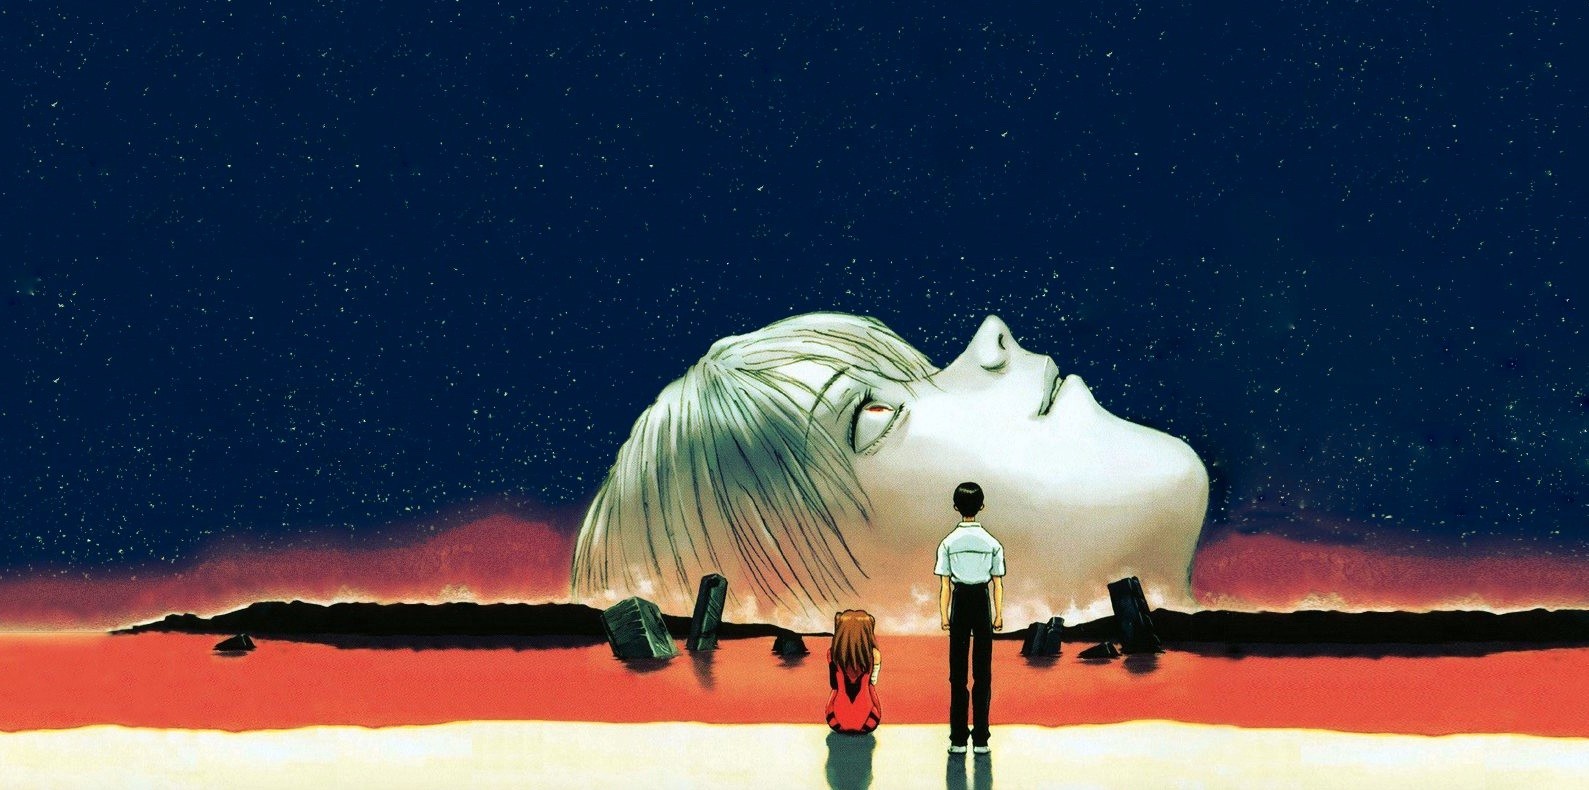 THE END OF EVANGELION (1997)